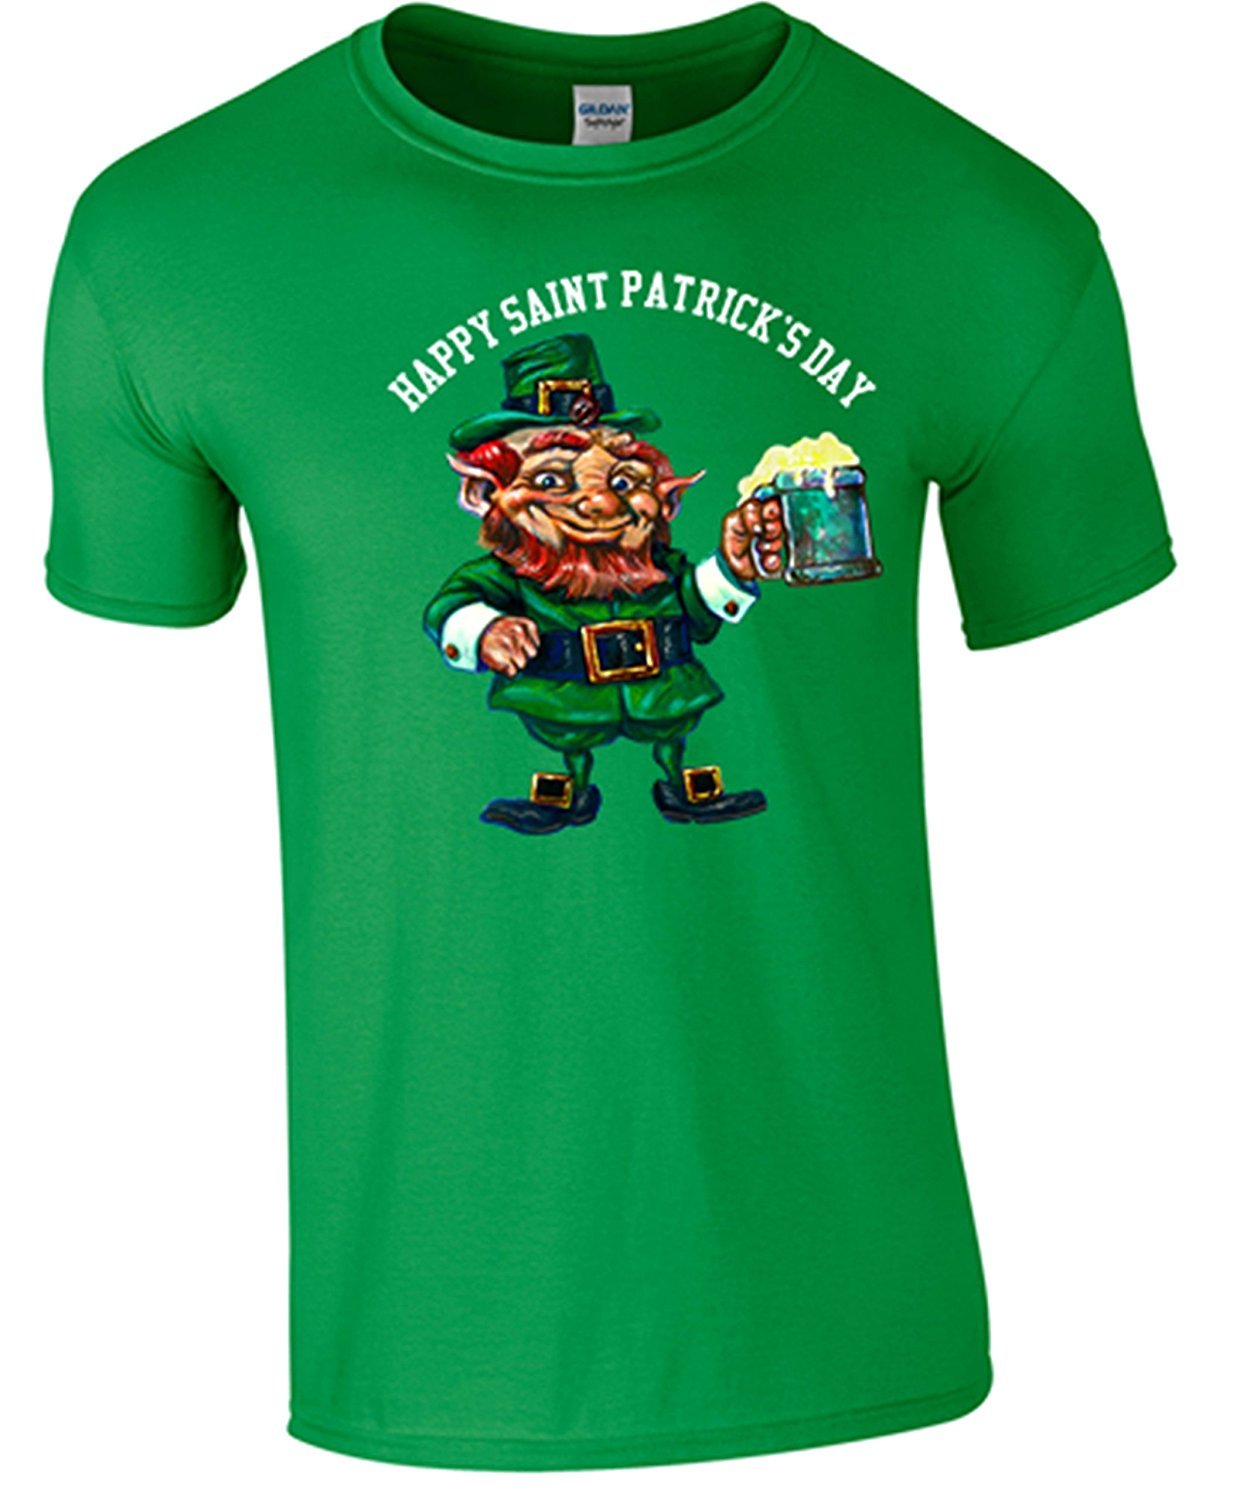 ST Patrick's Day T/Shirt (S, Forest Green) - Army 1157 Kit  Veterans Owned Business